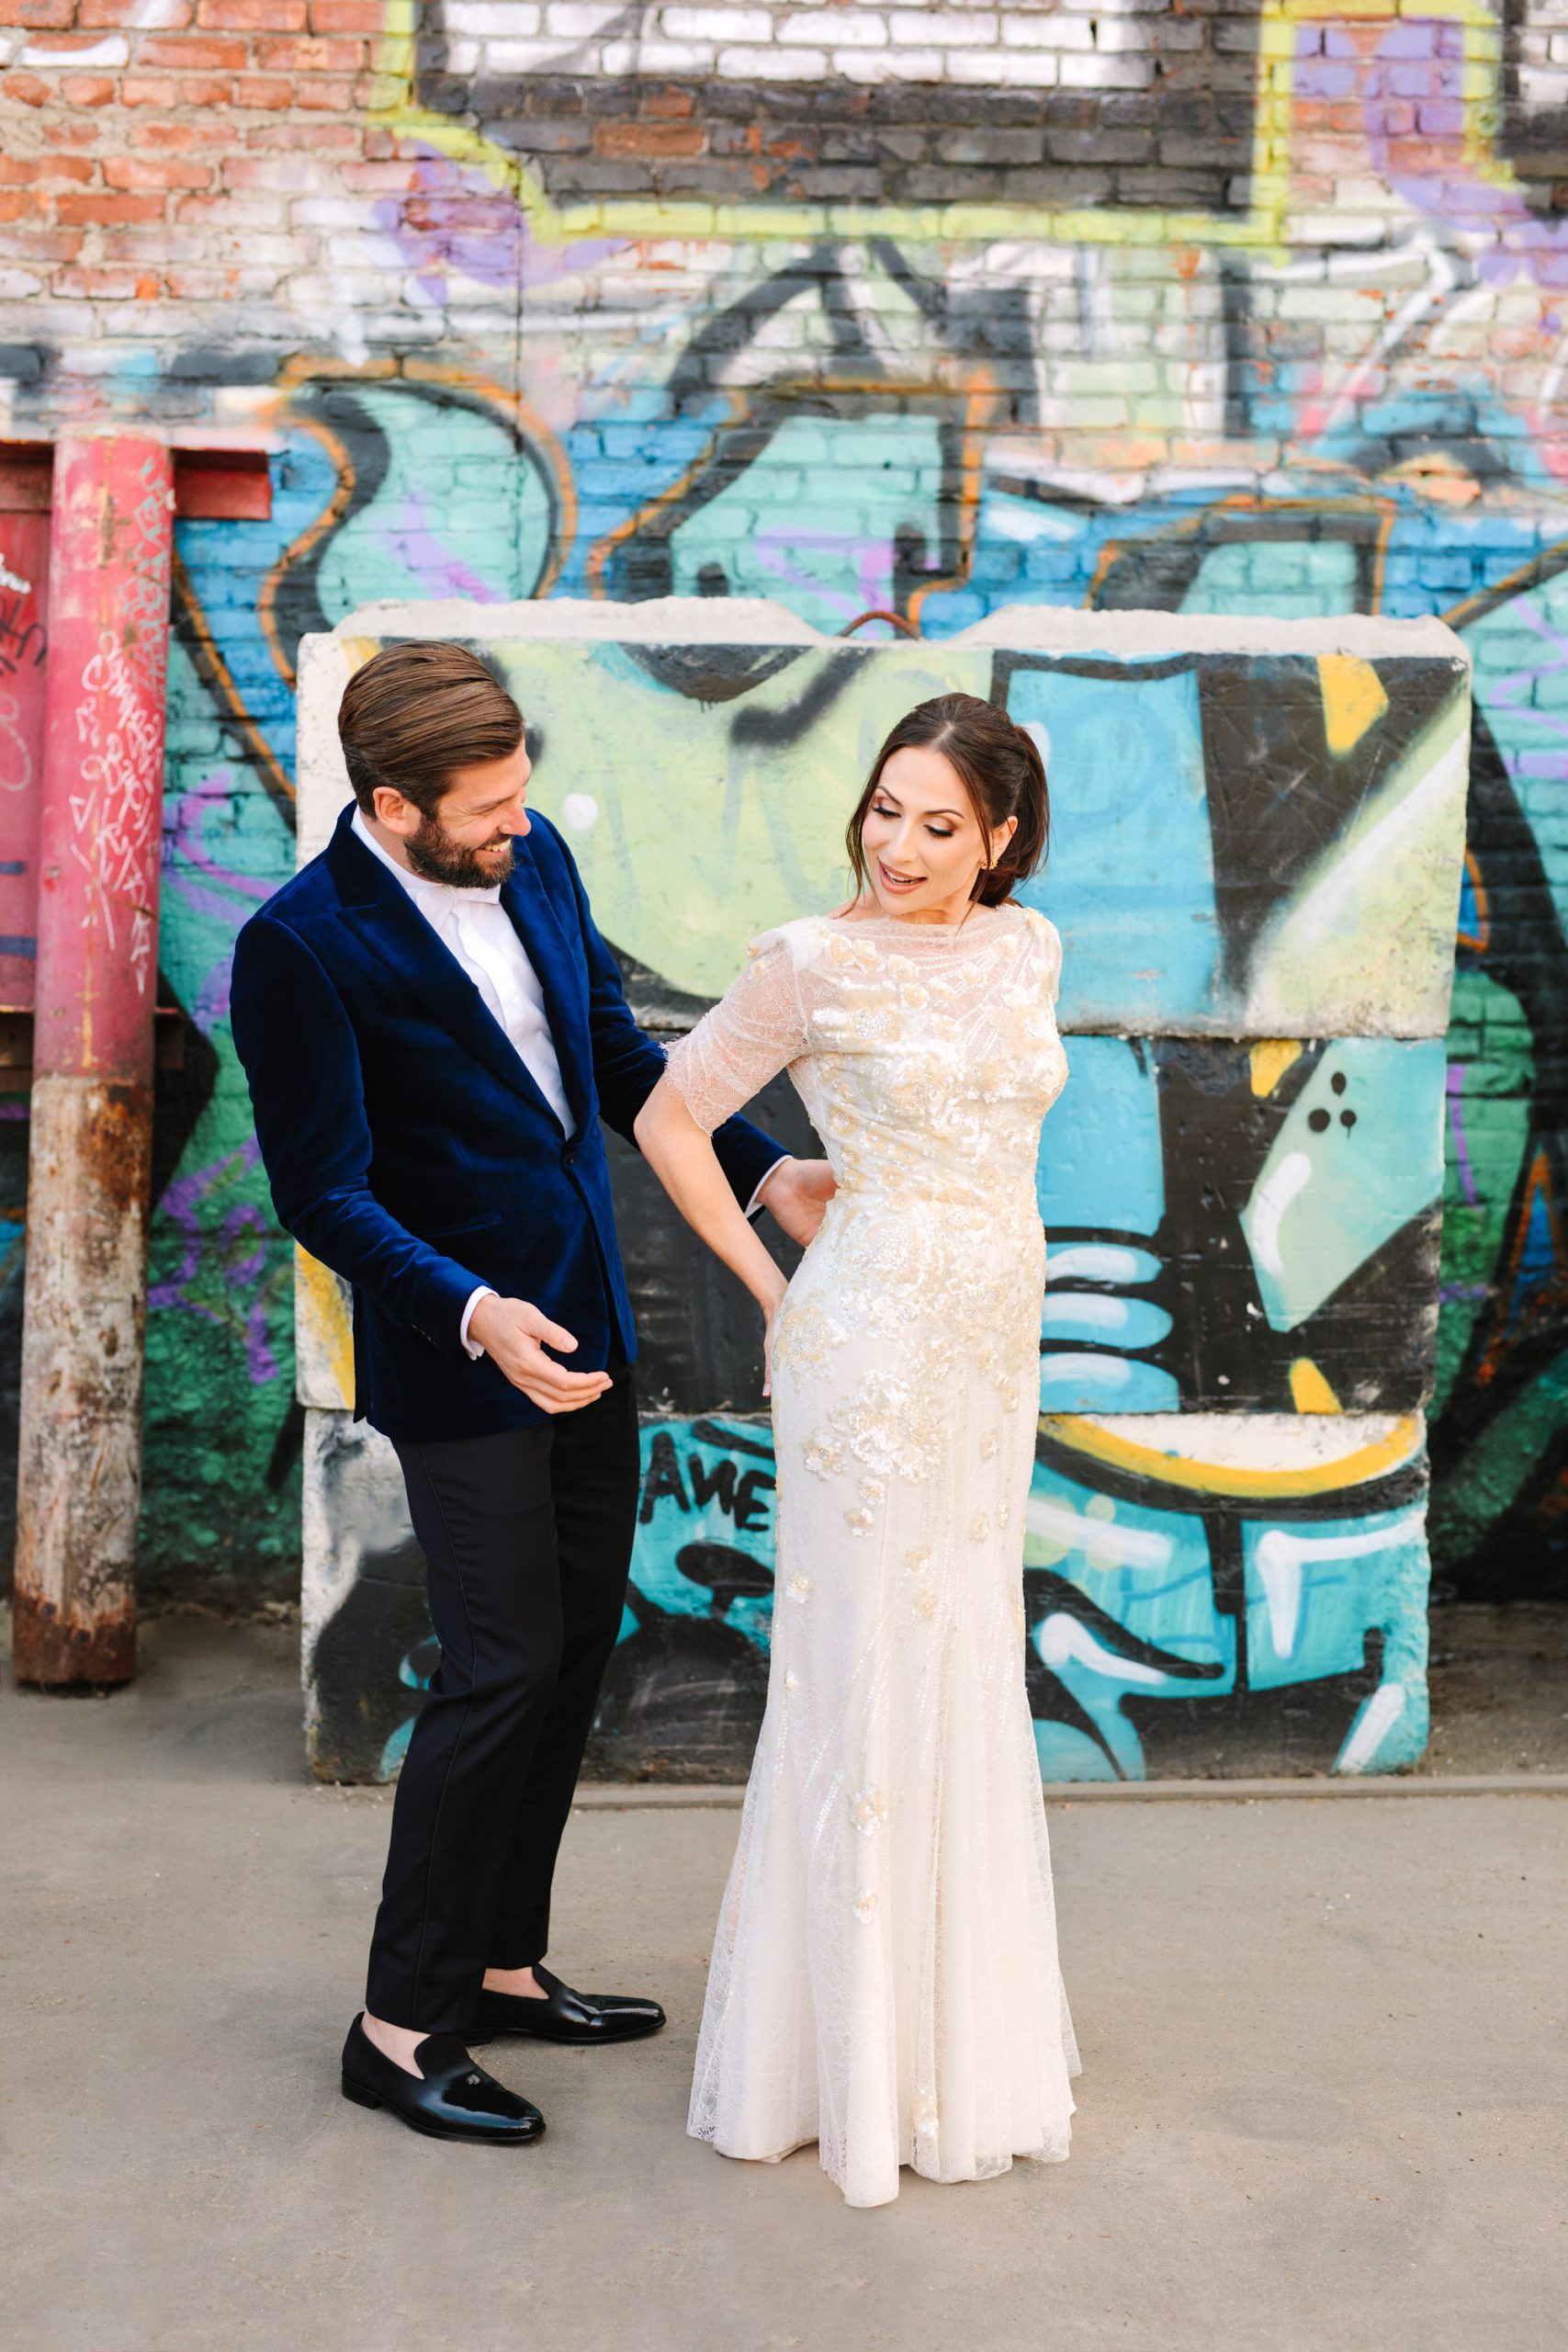 Bride and groom first look with graffiti backdrop in LA www.marycostaweddings.com